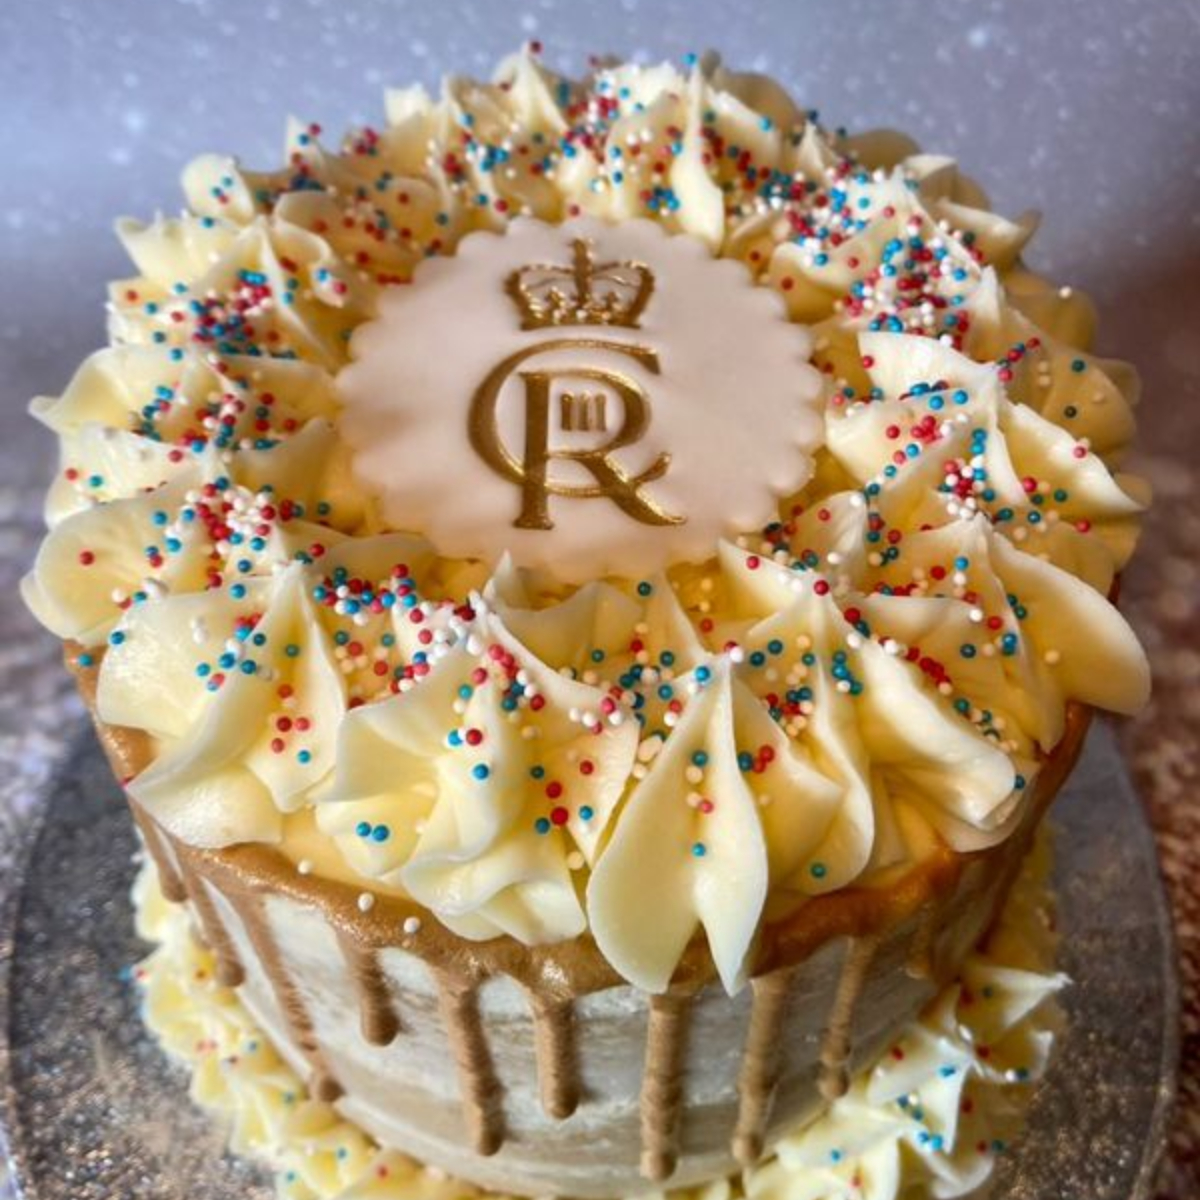 A vanilla sponge decorated with a gold royal insignia and gold drip down the sides